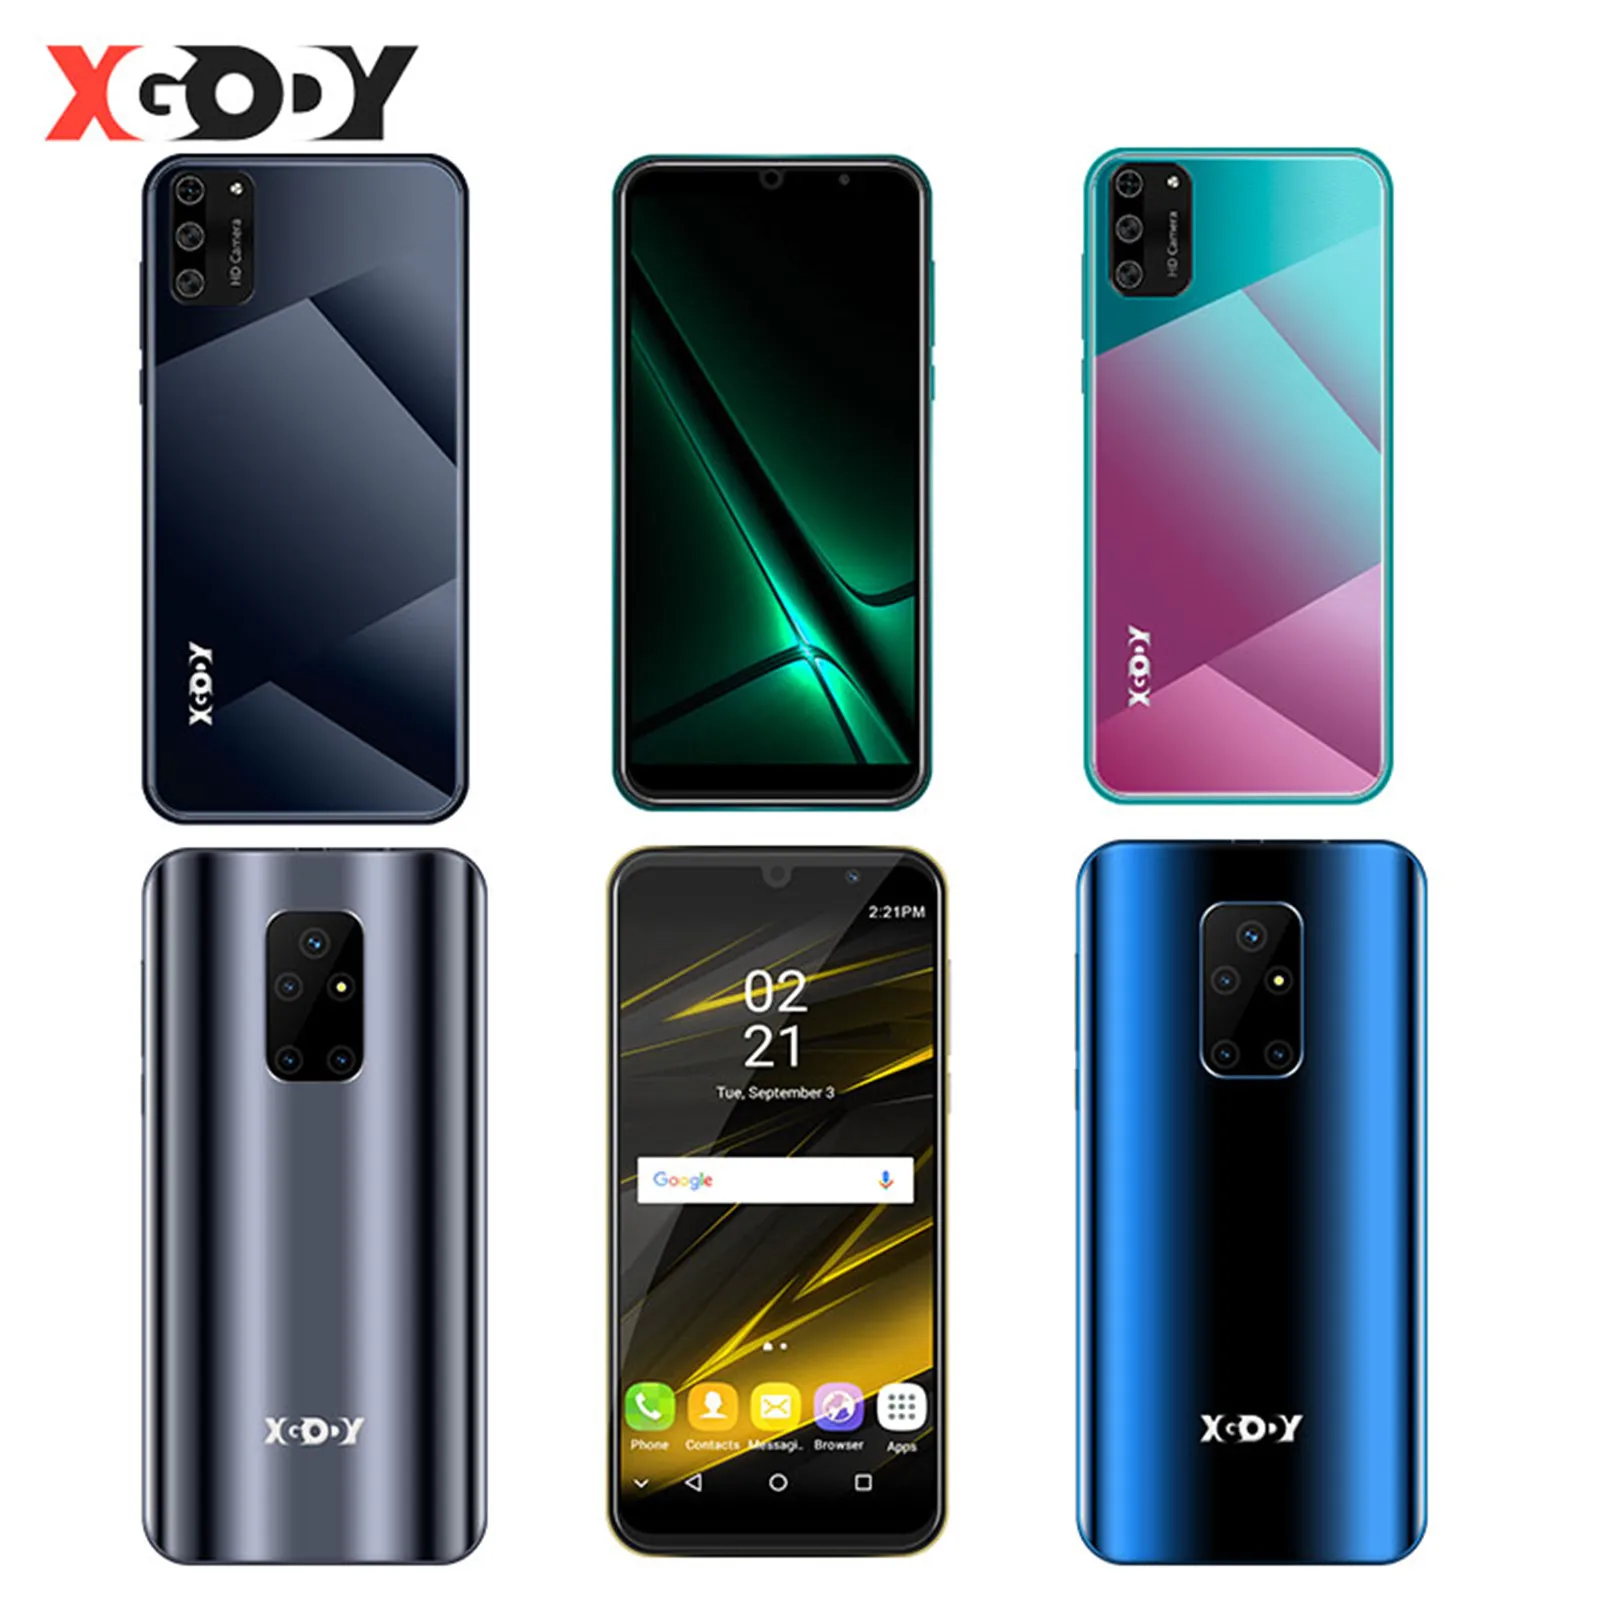 

XGODY 5.5inch Smartphone Android 9.0 18:9 Full Screen 1GB 8GB Quad Core 5MP Camera 2500mAh GPS WiFi 3G Mobile Phones from Spain